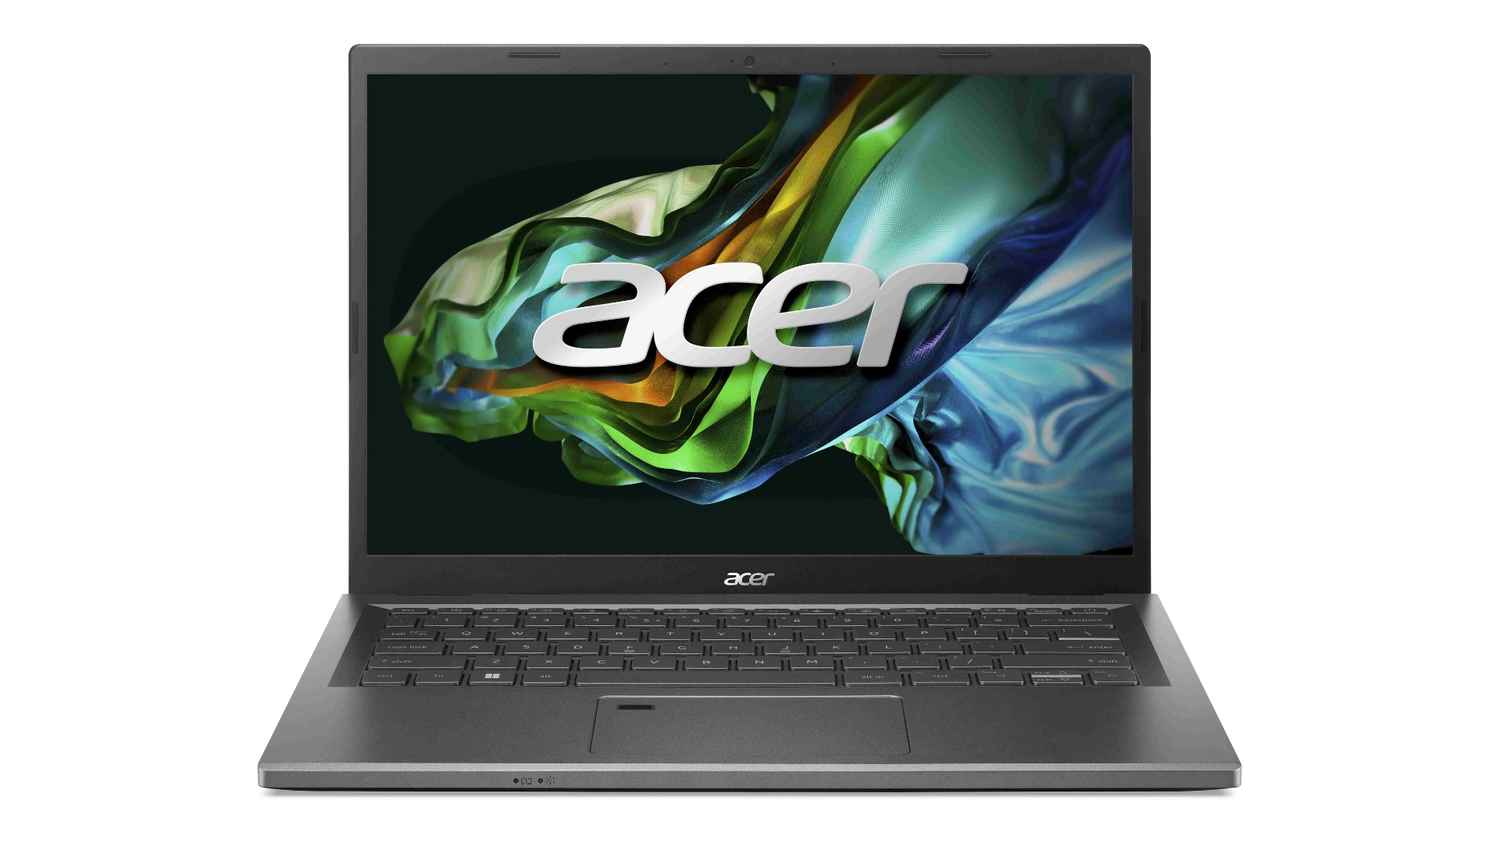 Acer Aspire 5 launches with an Nvidia RTX 2050 GPU capable of AI and Ray Tracing